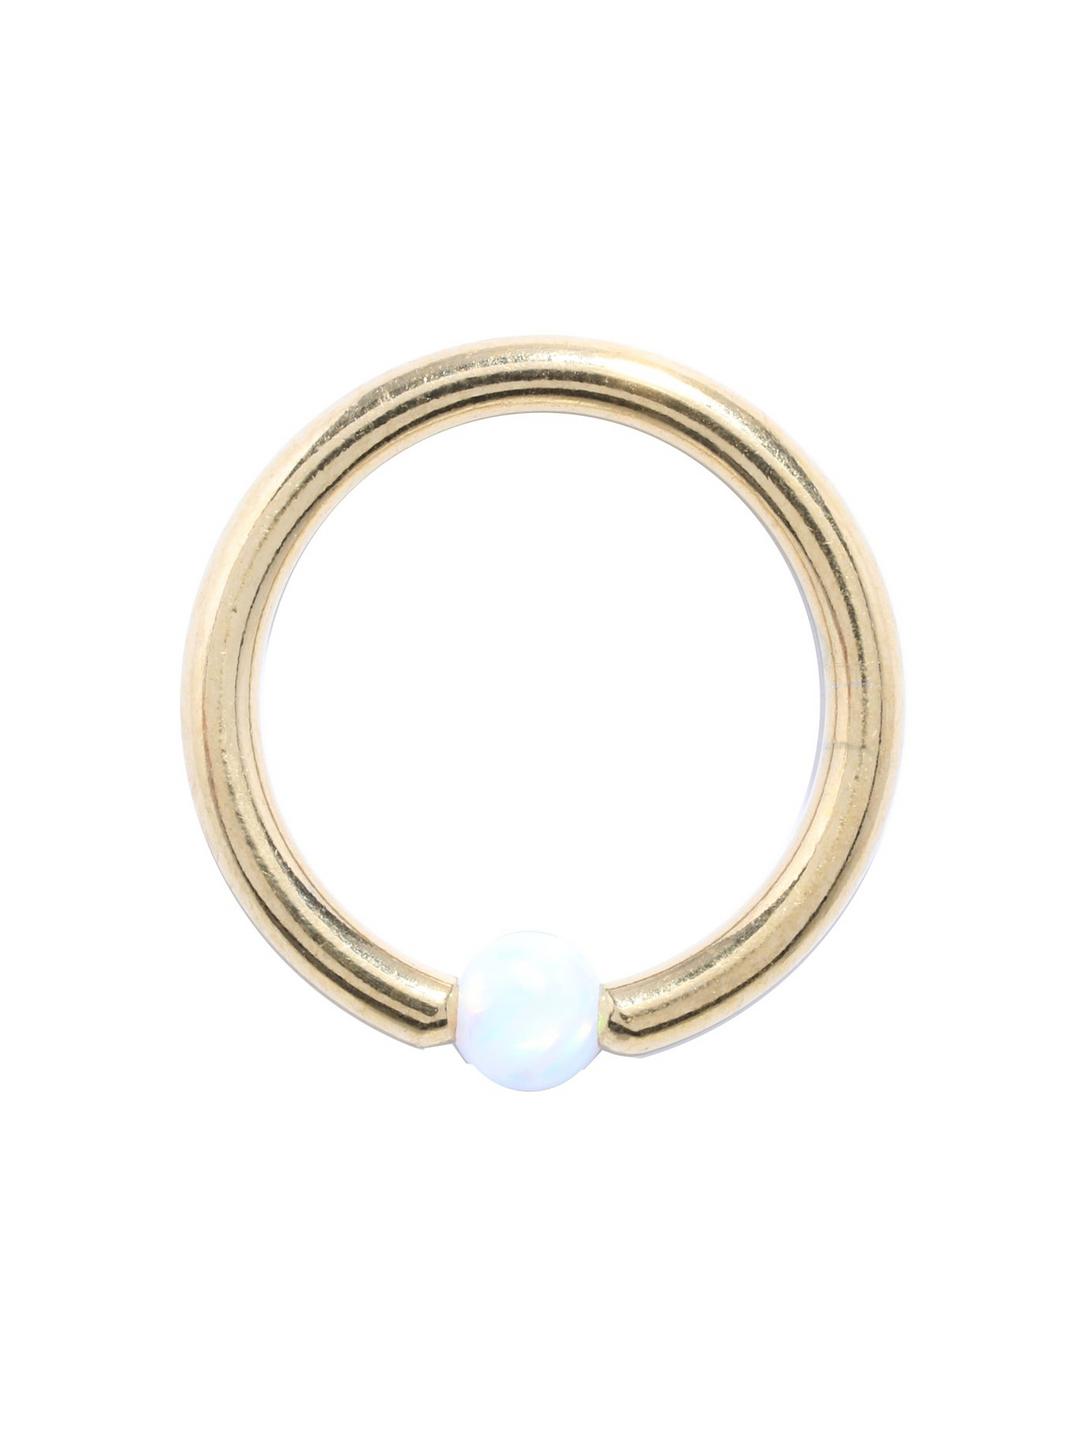 14G 7/16 Steel Gold Plated & White Ball Captive Hoop, GOLD, hi-res